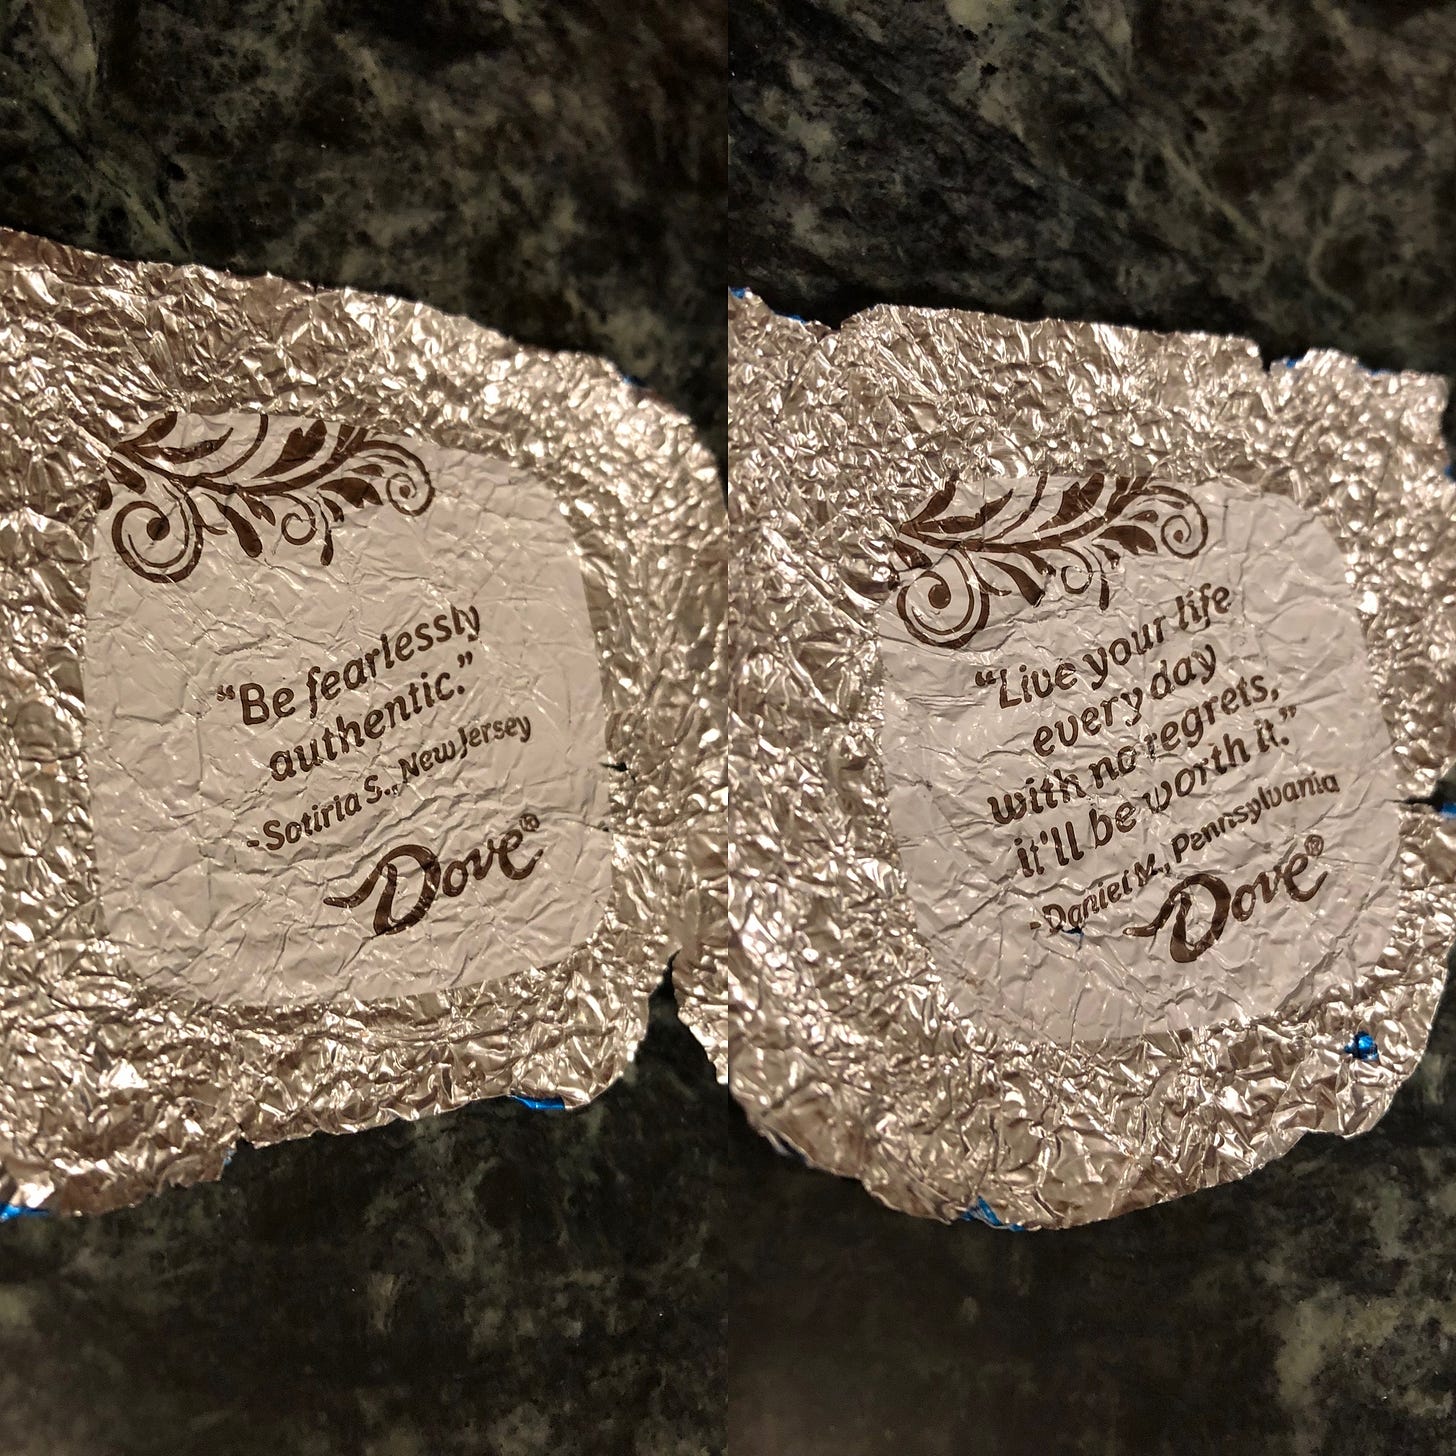 Two foil chocolate wrappers that say “Be fearlessly authentic” and Live your life every day with no regrets. It’ll be worth it.”